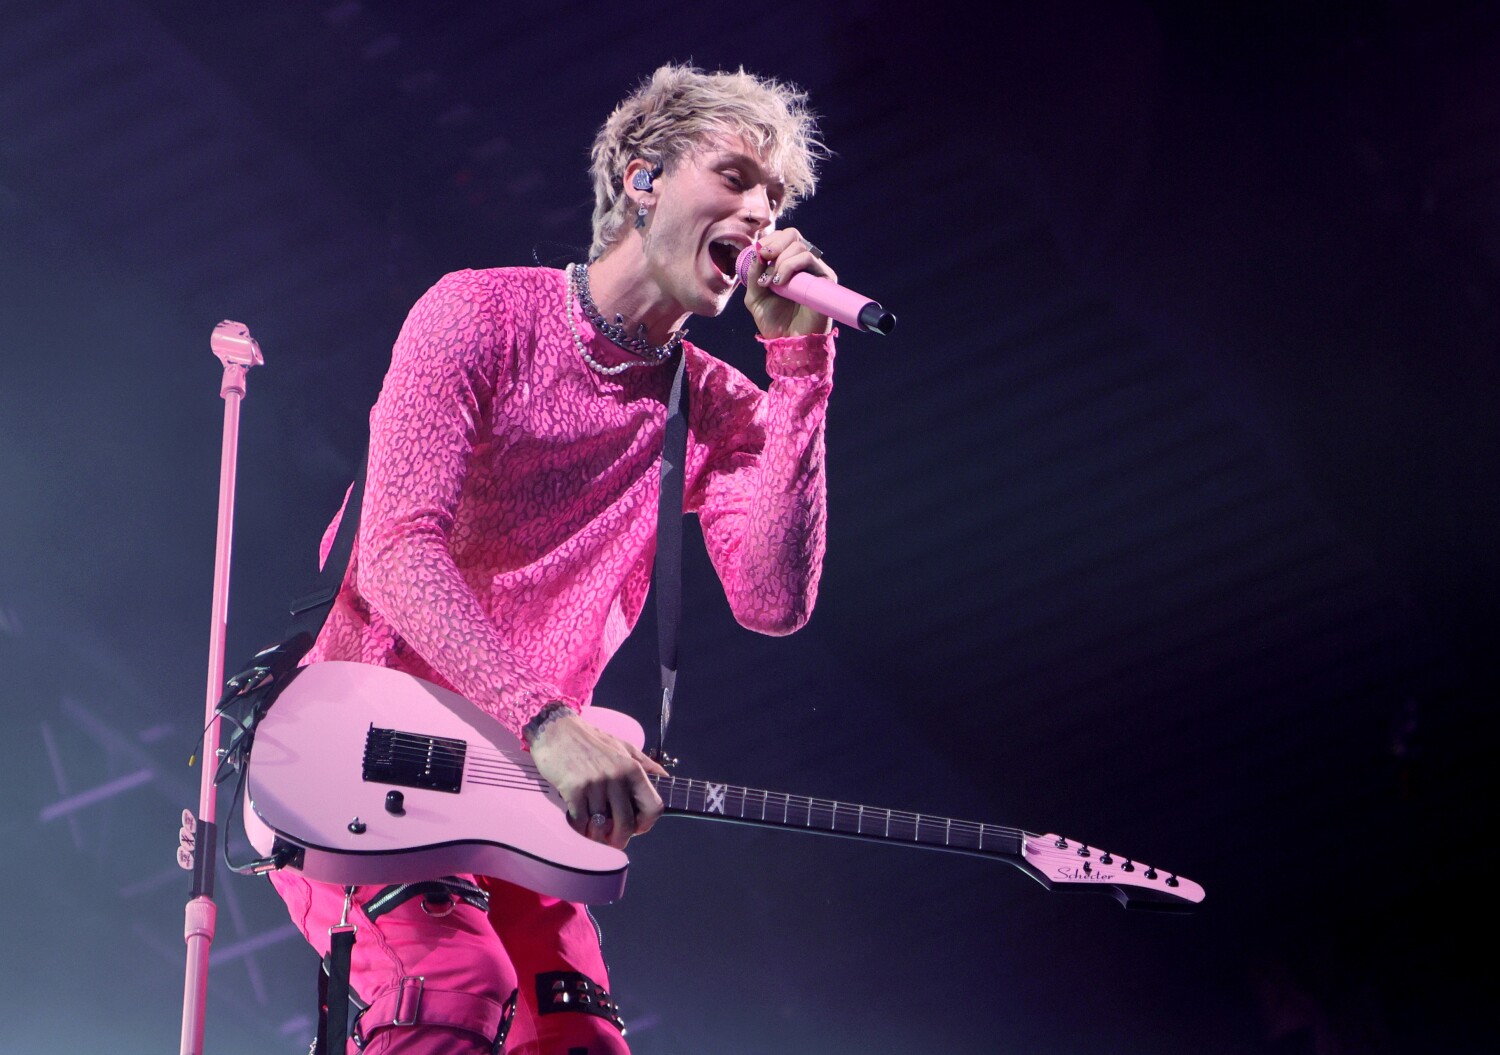 Machine Gun Kelly bloodies himself with smashed wine glass at a New York afterparty